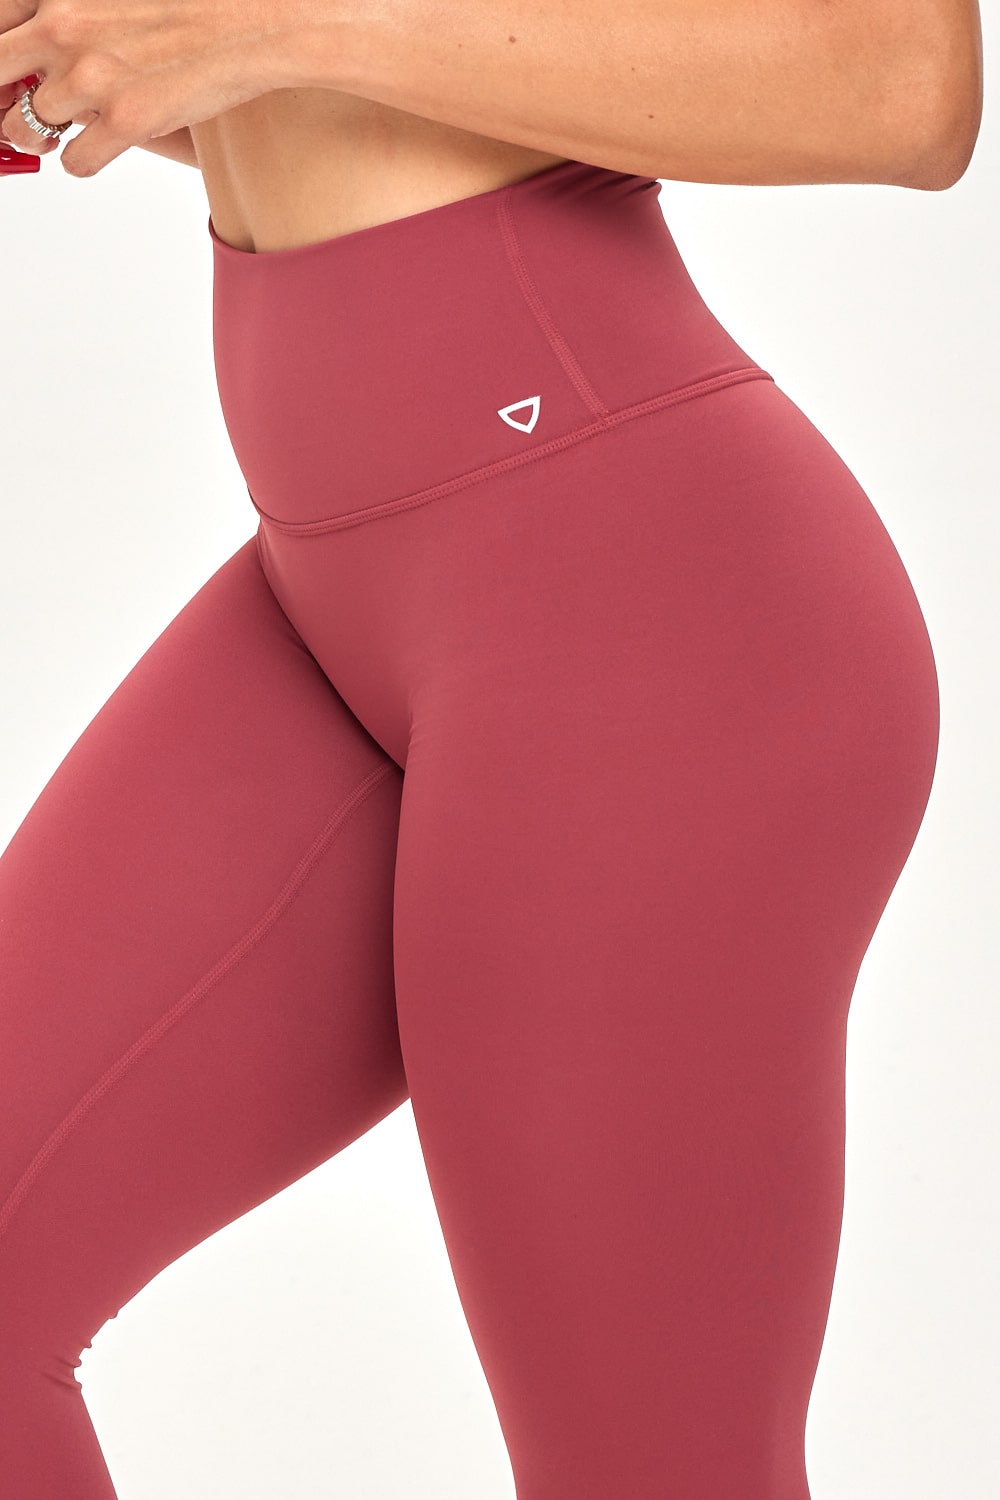 Luxana Leggings - Forza Red